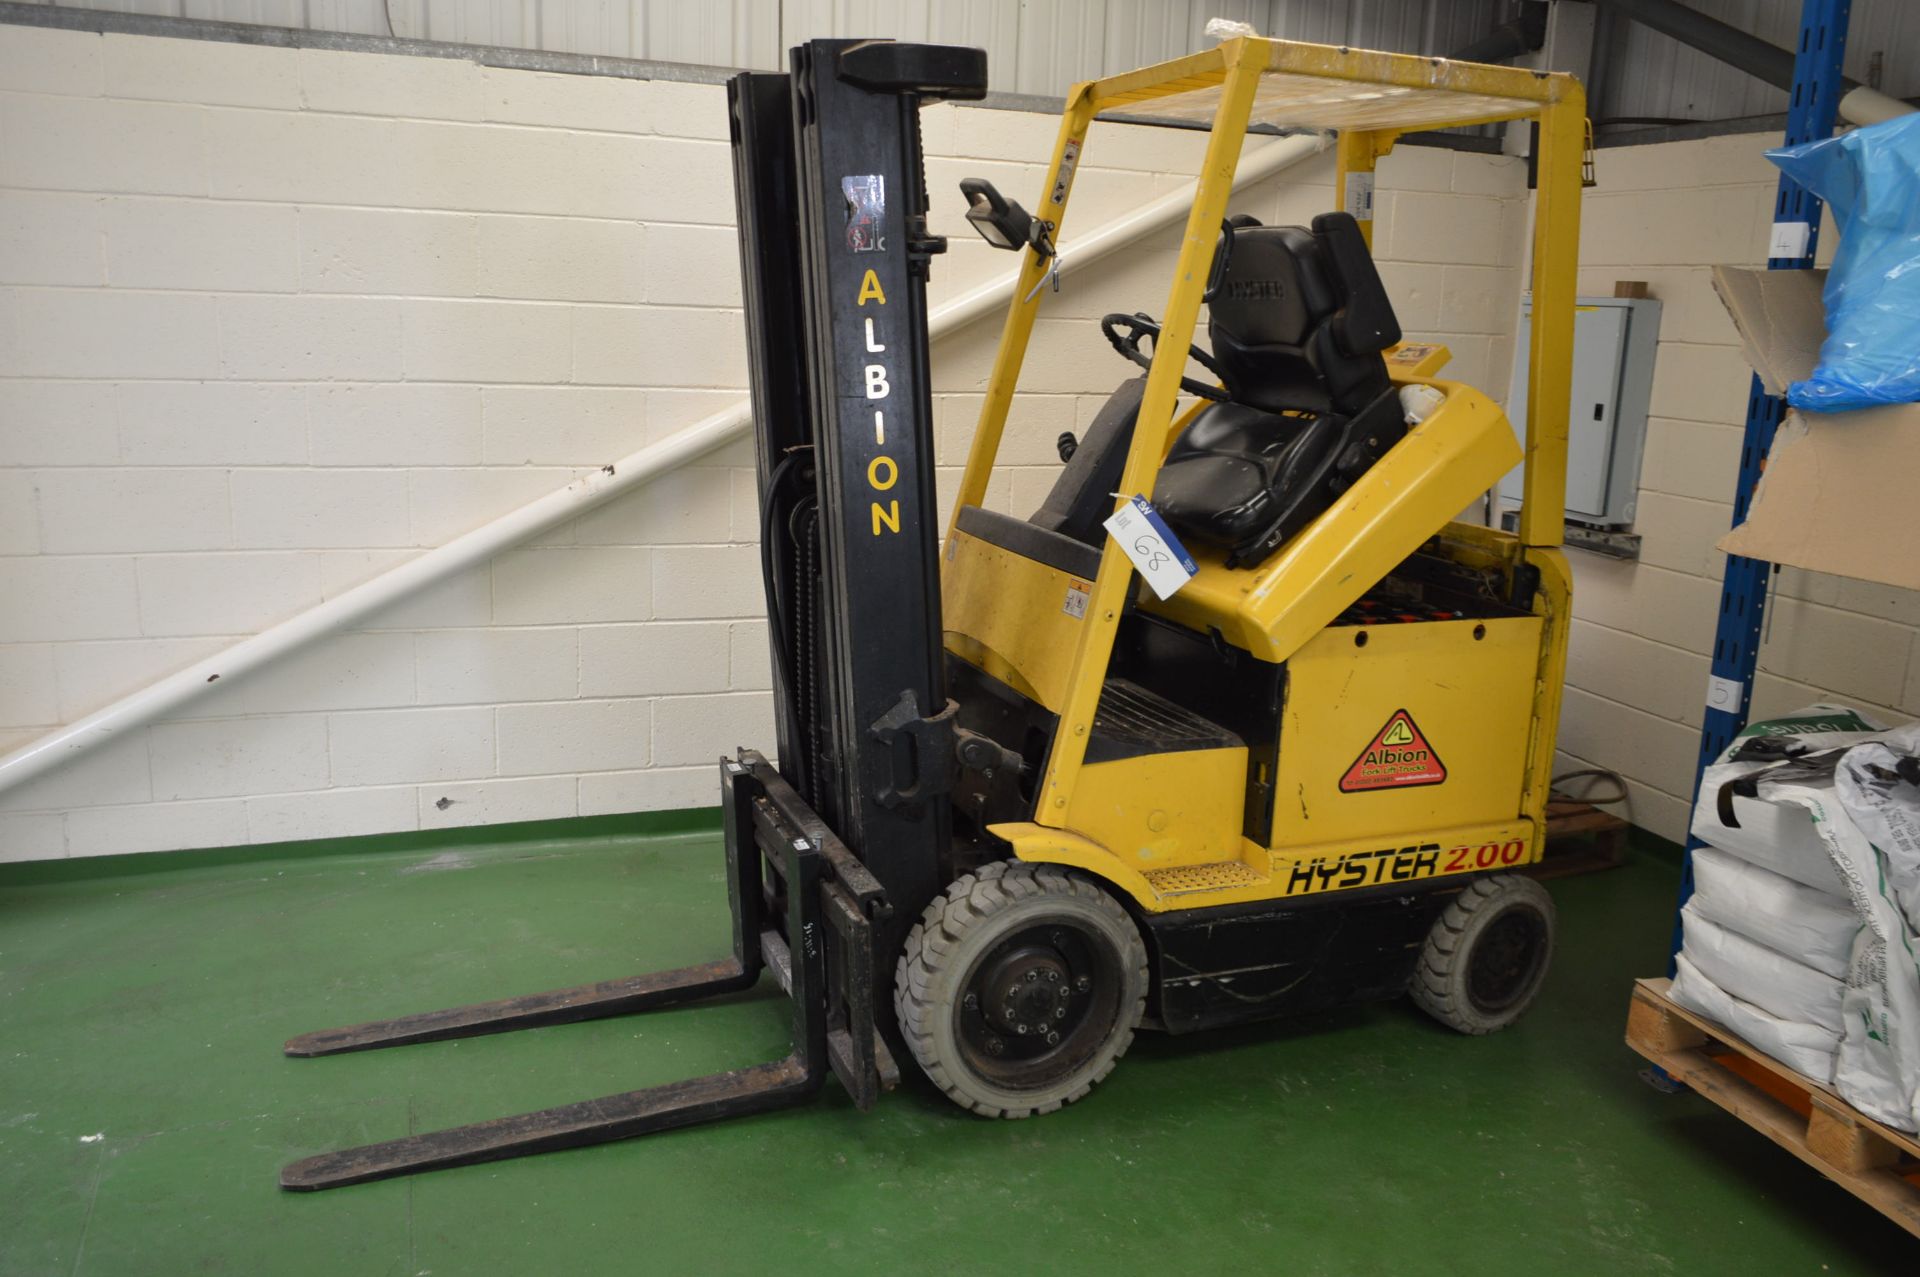 Hyster E.200XM-700 2000kg BATTERY ELECTRIC FORK LIFT TRUCK, with triple mast 2.1m high and side